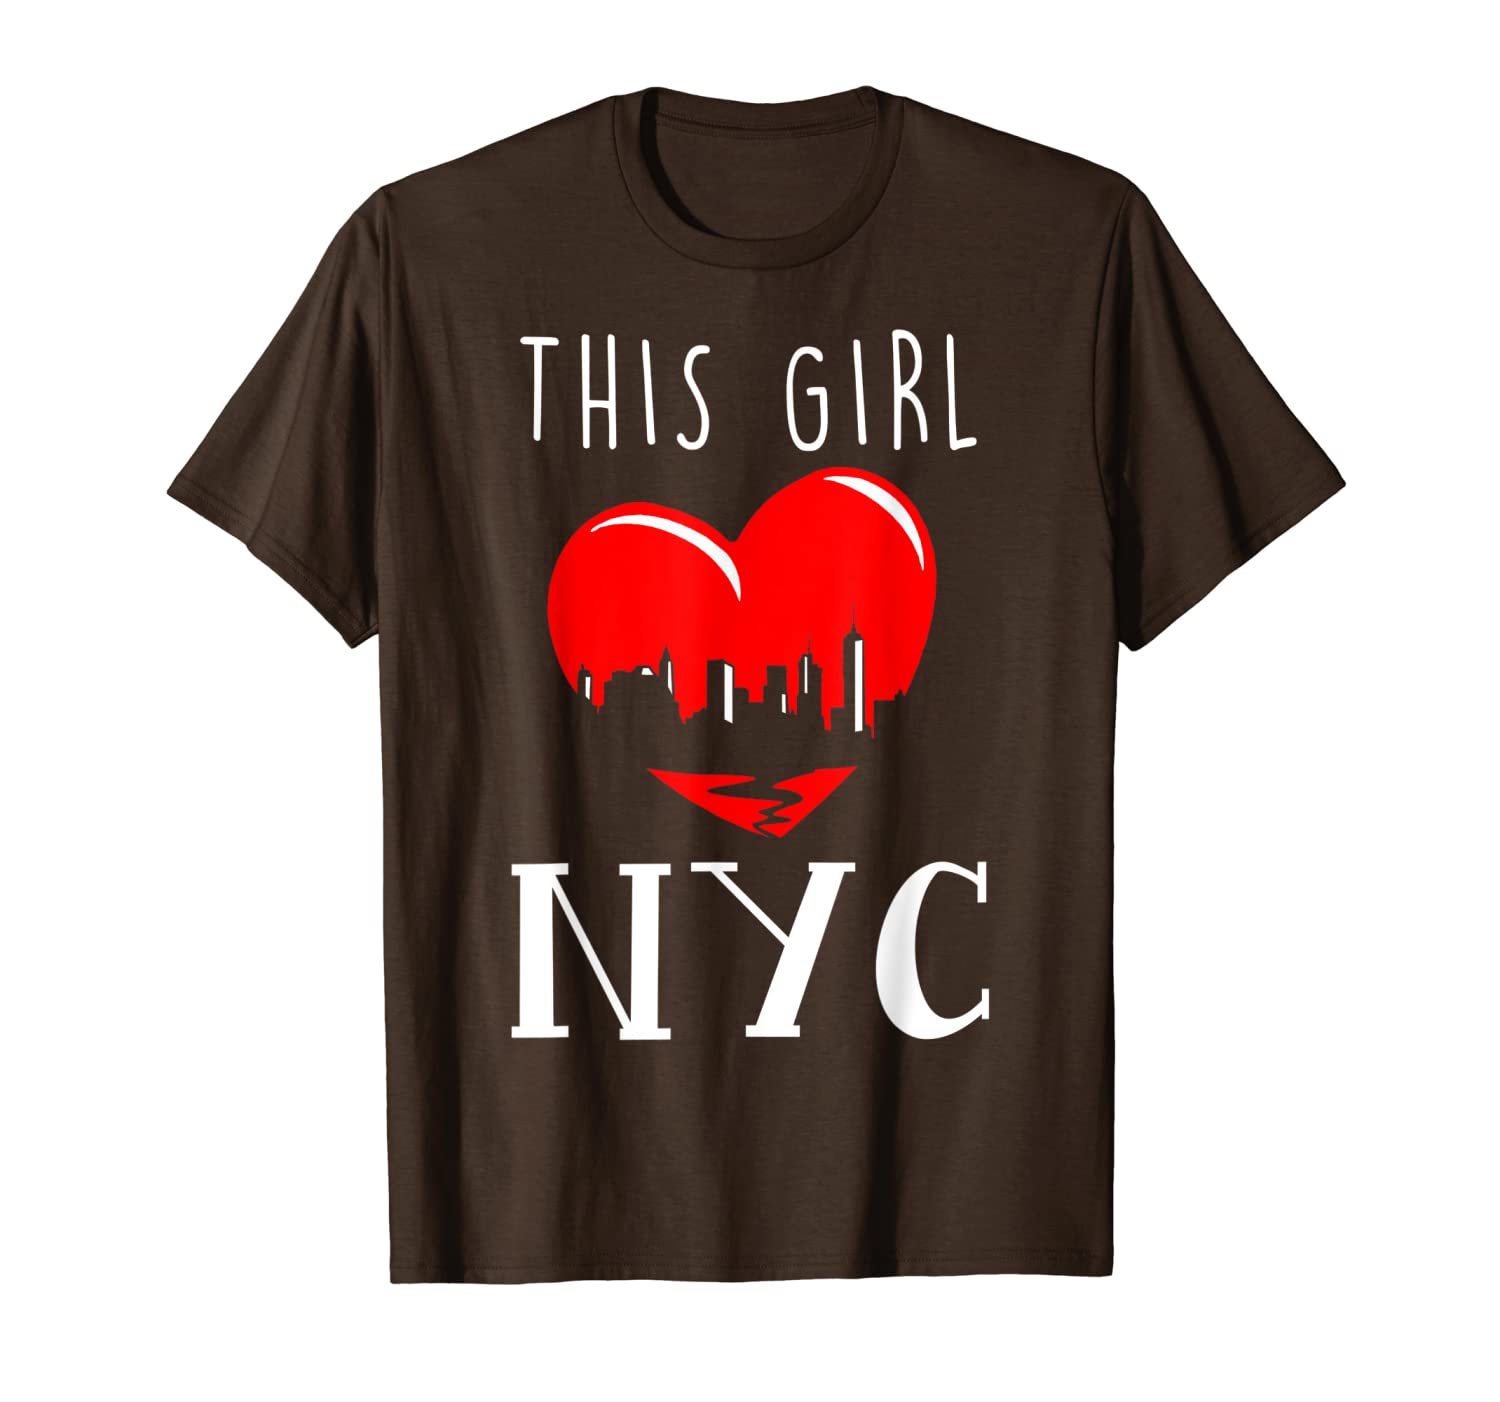 

I love New York NYC New York City T-Shirt, Mainly pictures